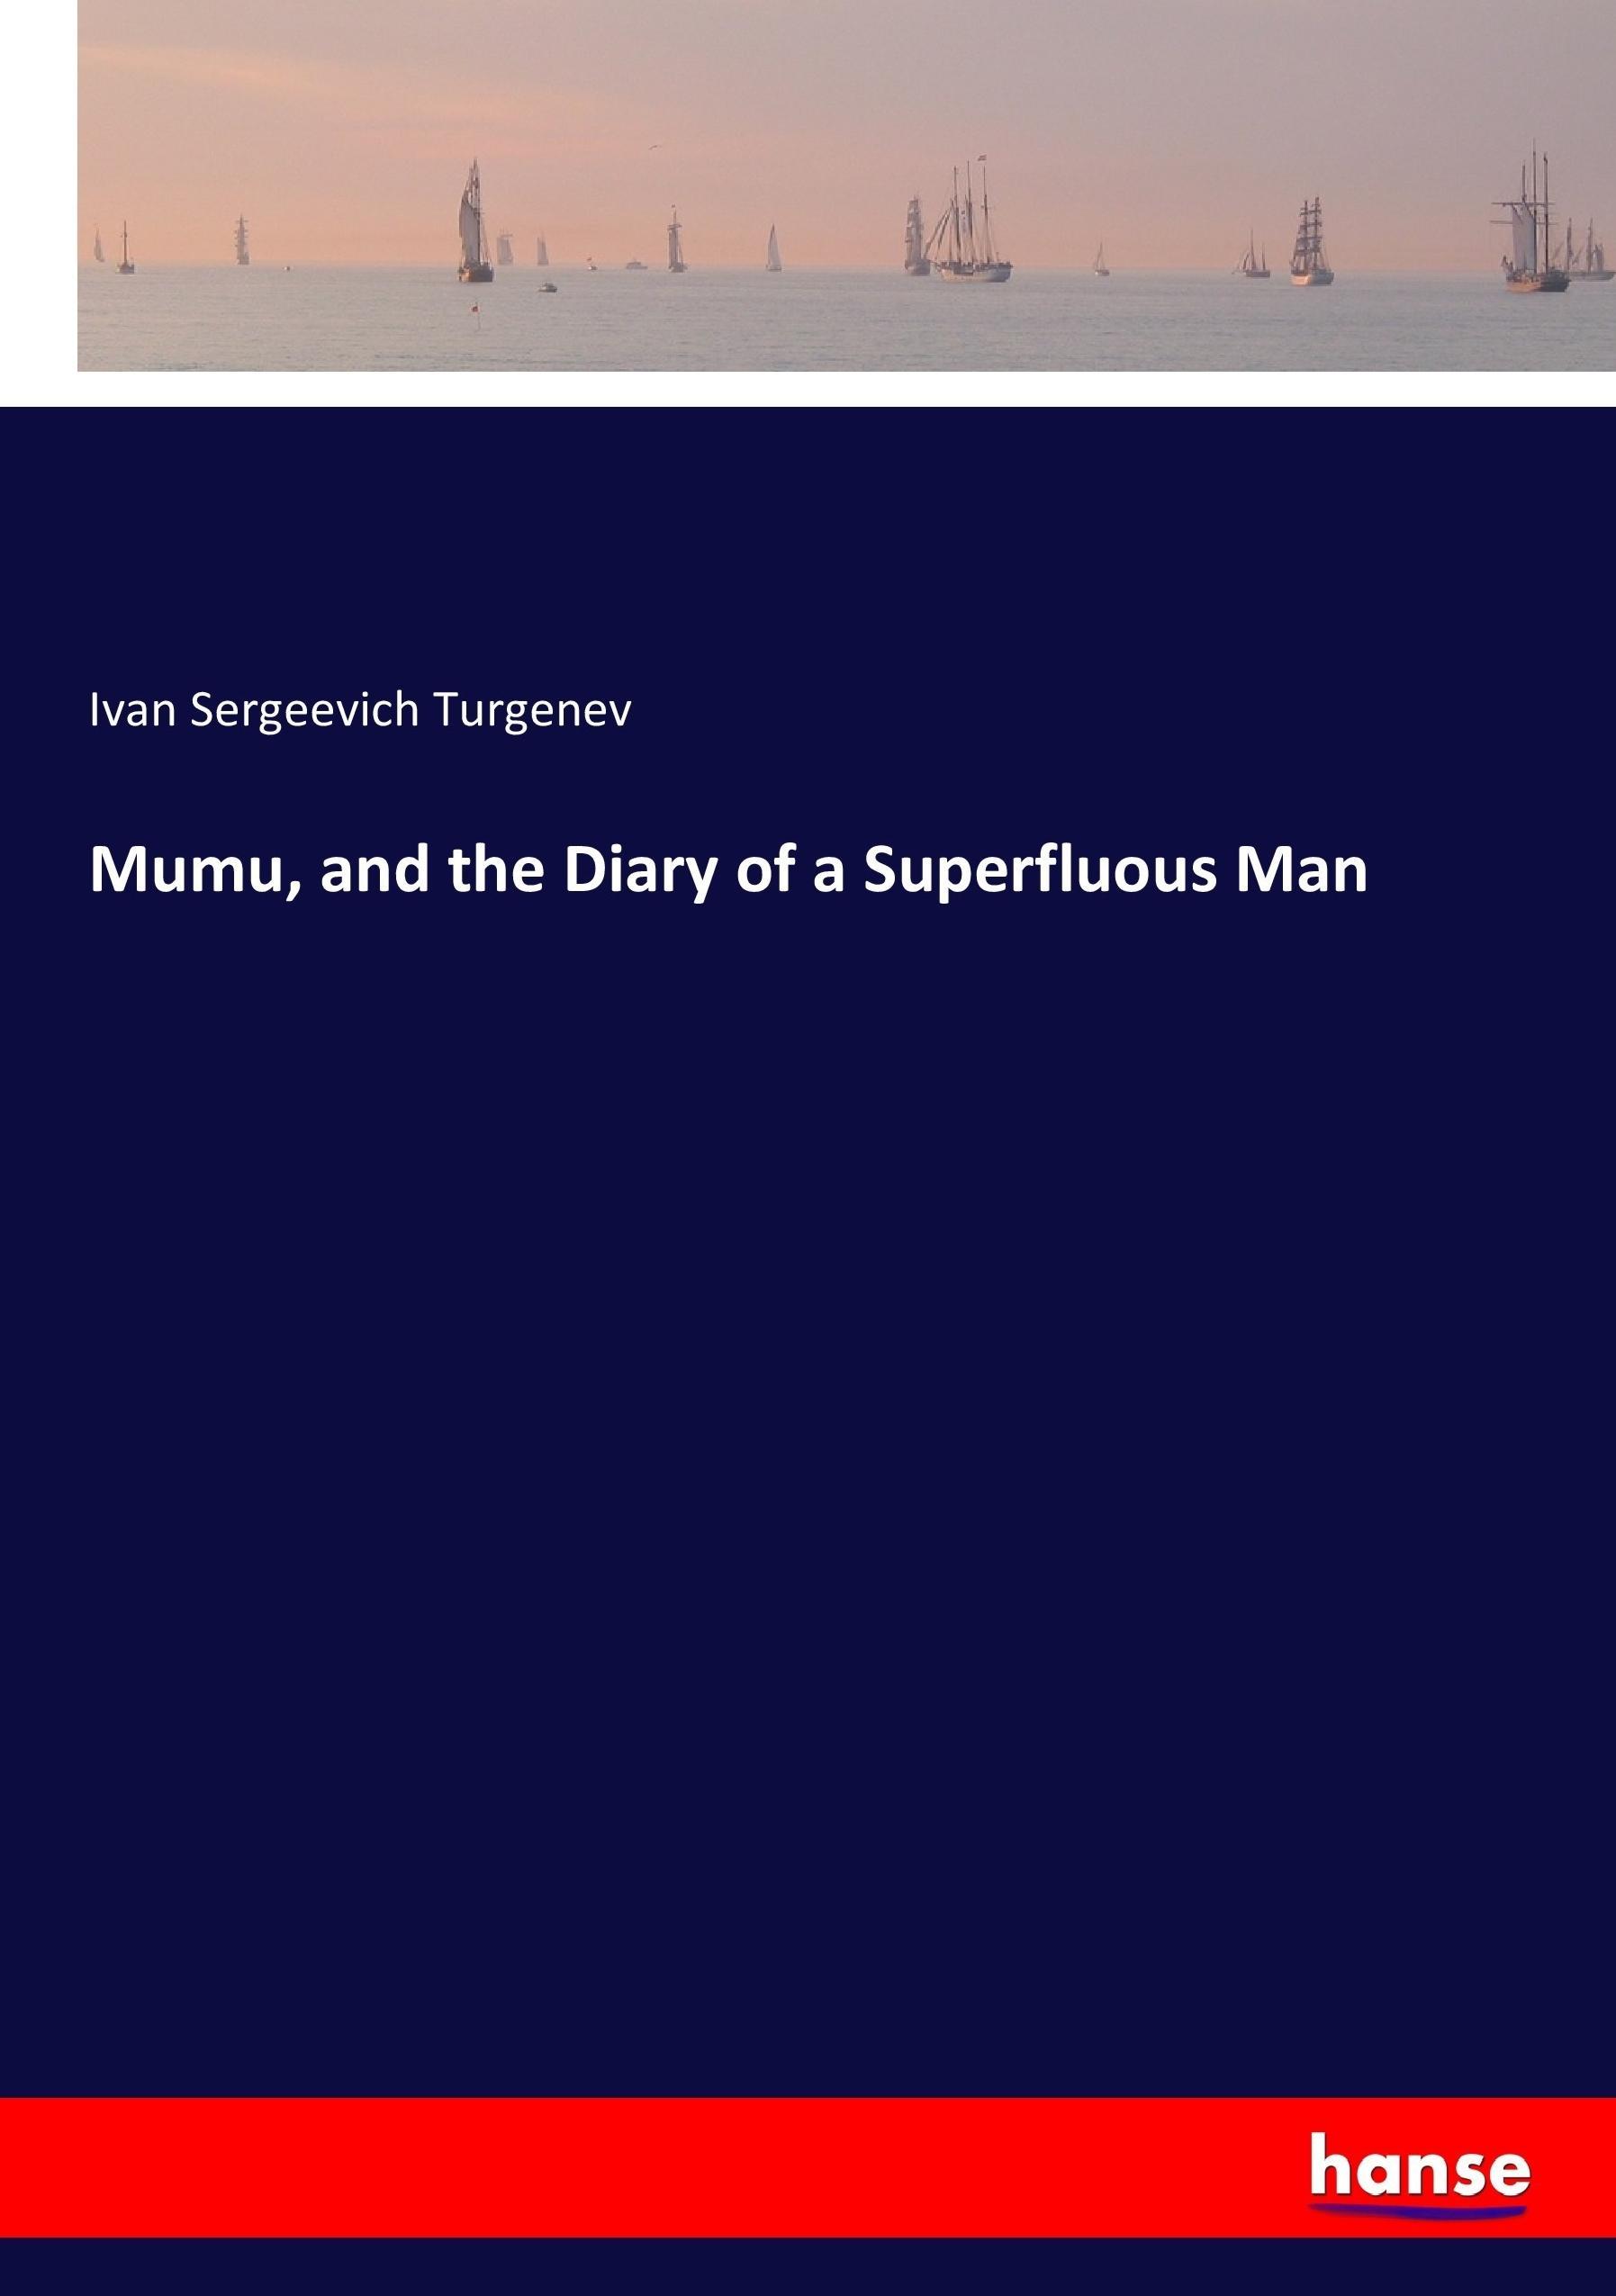 Mumu, and the Diary of a Superfluous Man - Turgenev, Ivan Sergeevich